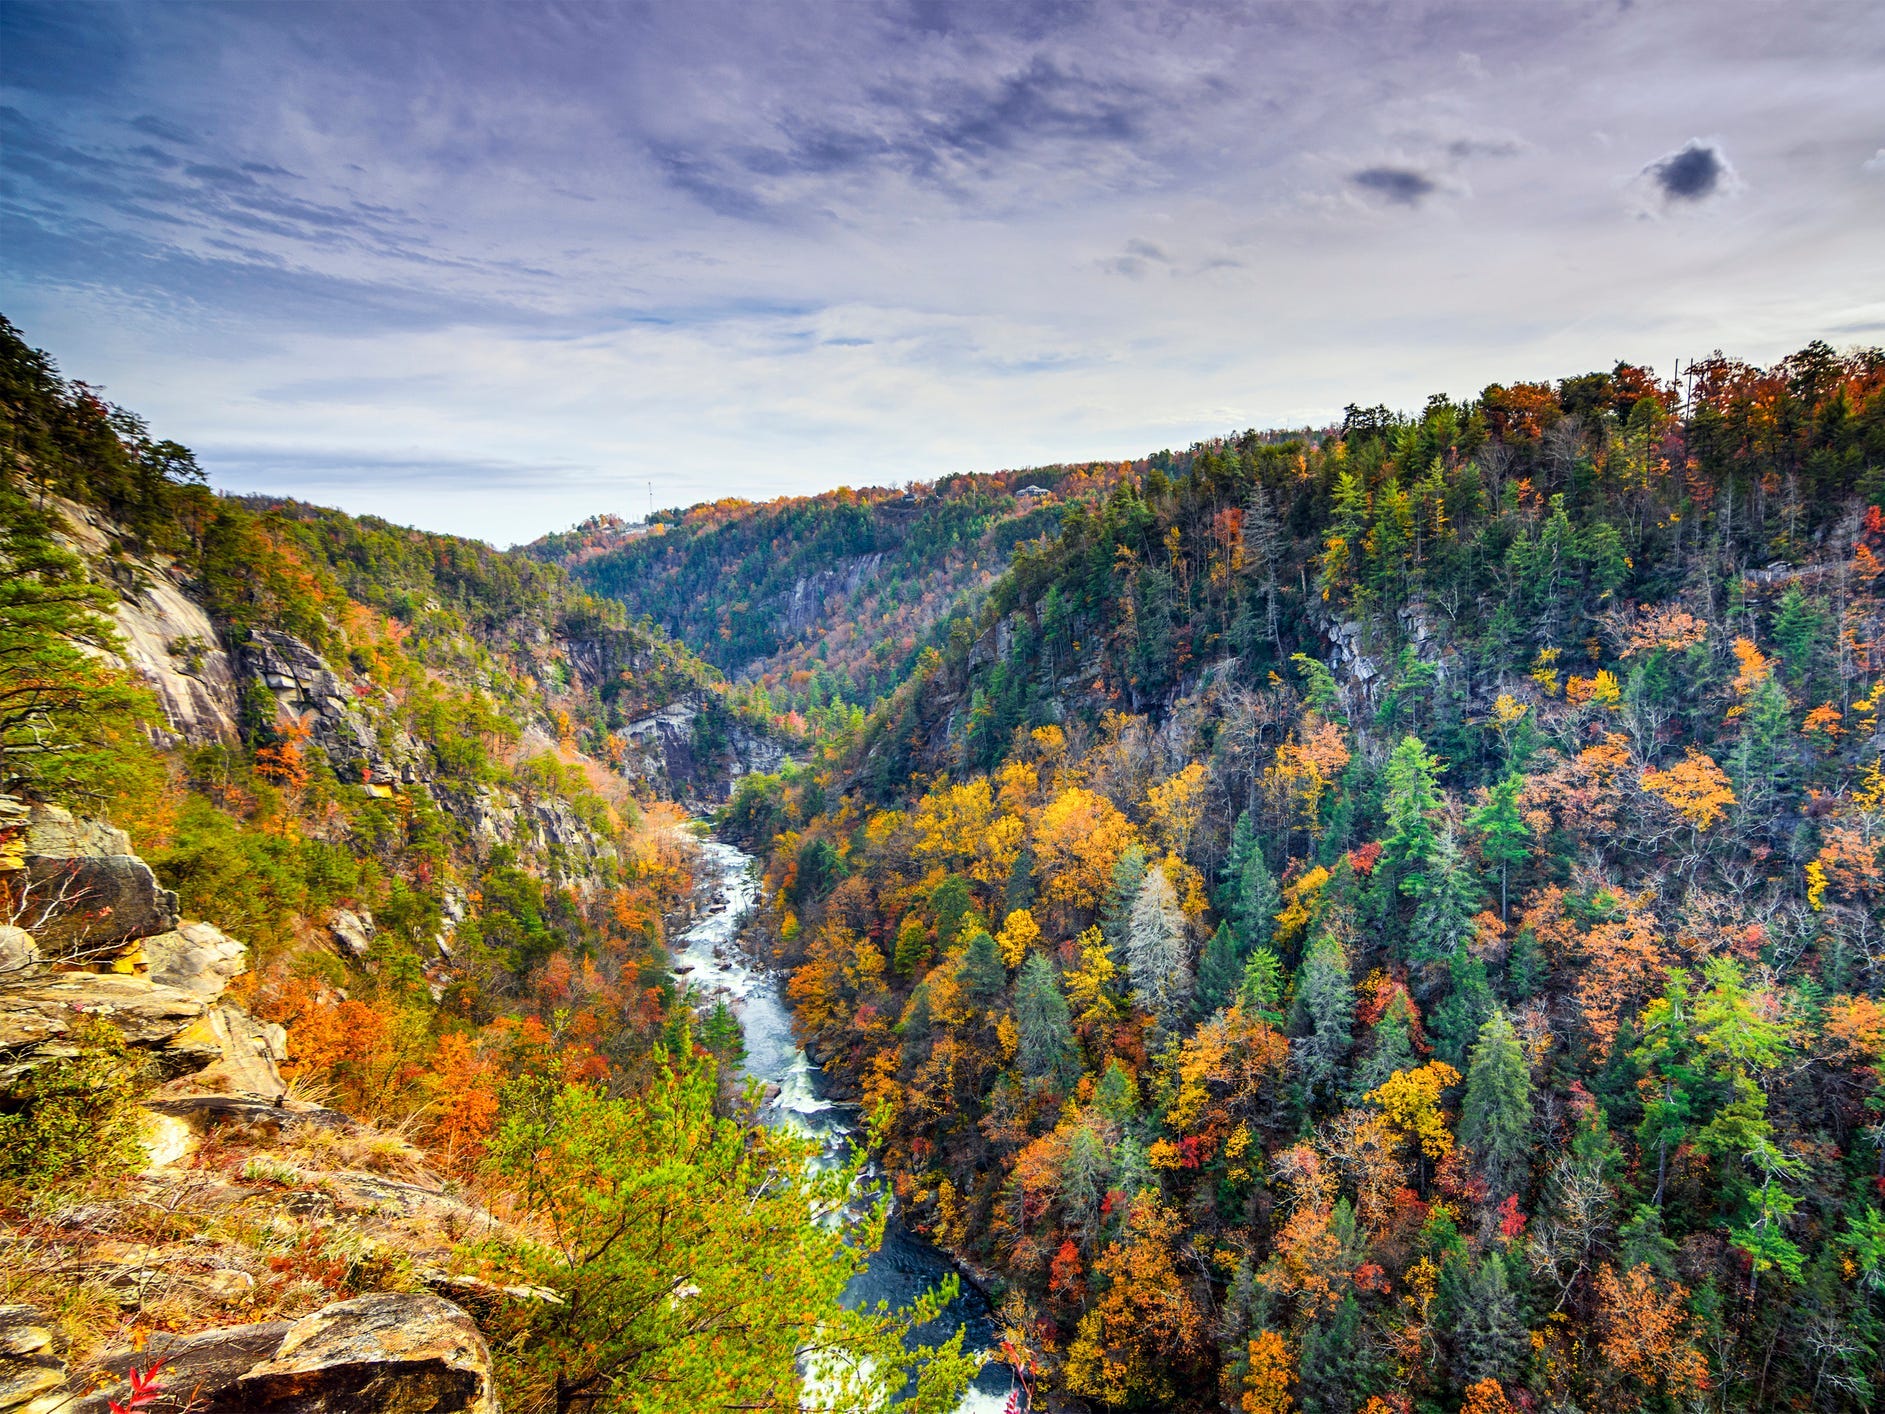 <p>The gorge, which is almost 2 miles long and 1,000 feet deep, features six waterfalls and an 80-foot suspension bridge. Insider previously named it the <a href="https://www.insider.com/beautiful-natural-attractions-in-every-state-2016-11#georgia-tallulah-gorge-10">most breathtaking natural wonder</a> in Georgia.</p>